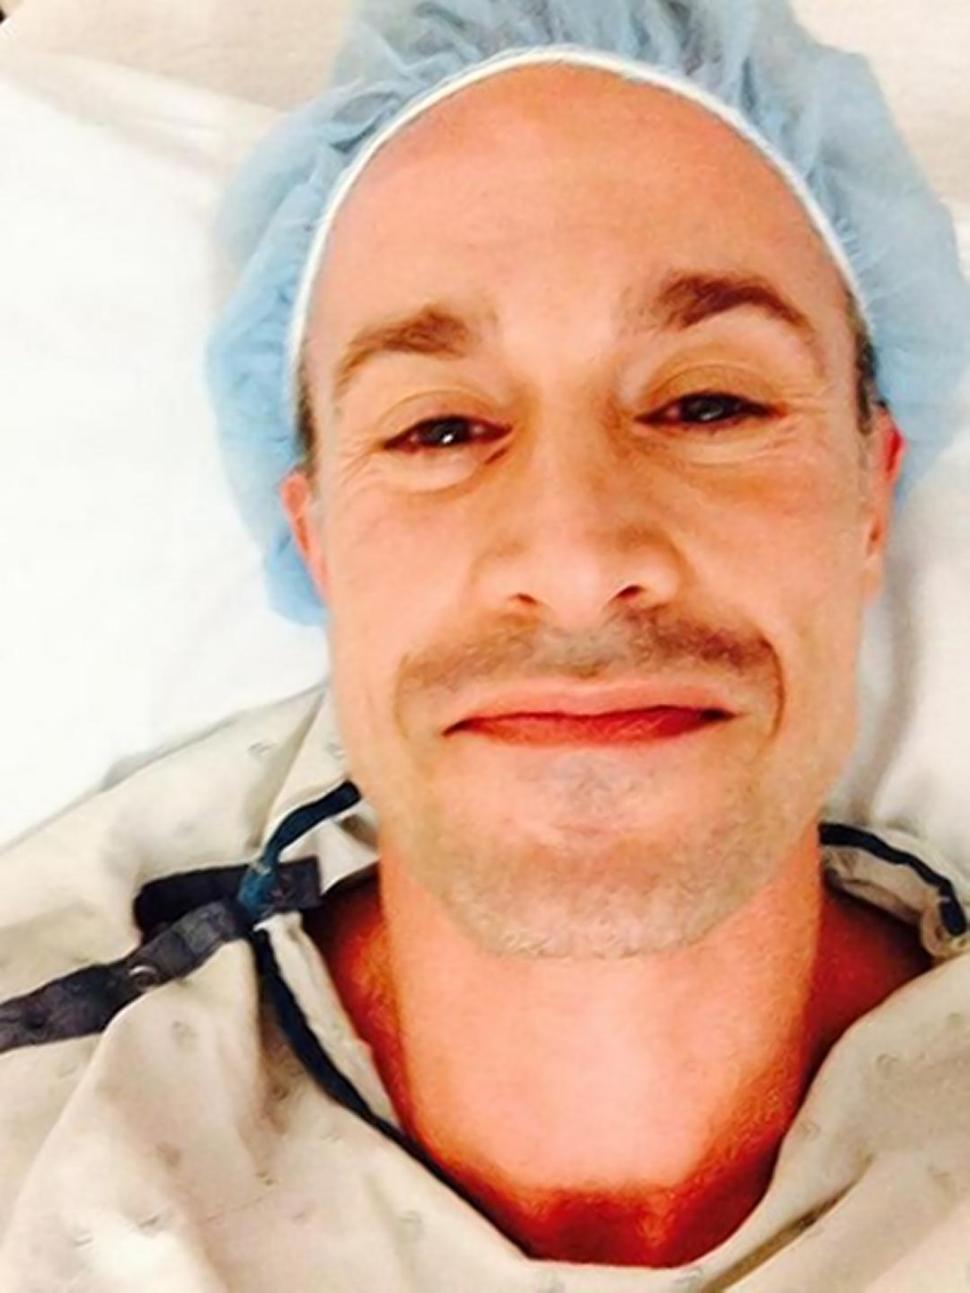 Freddie Prinze Jr. posted a photo to Twitter of himself before the spinal surgery ...